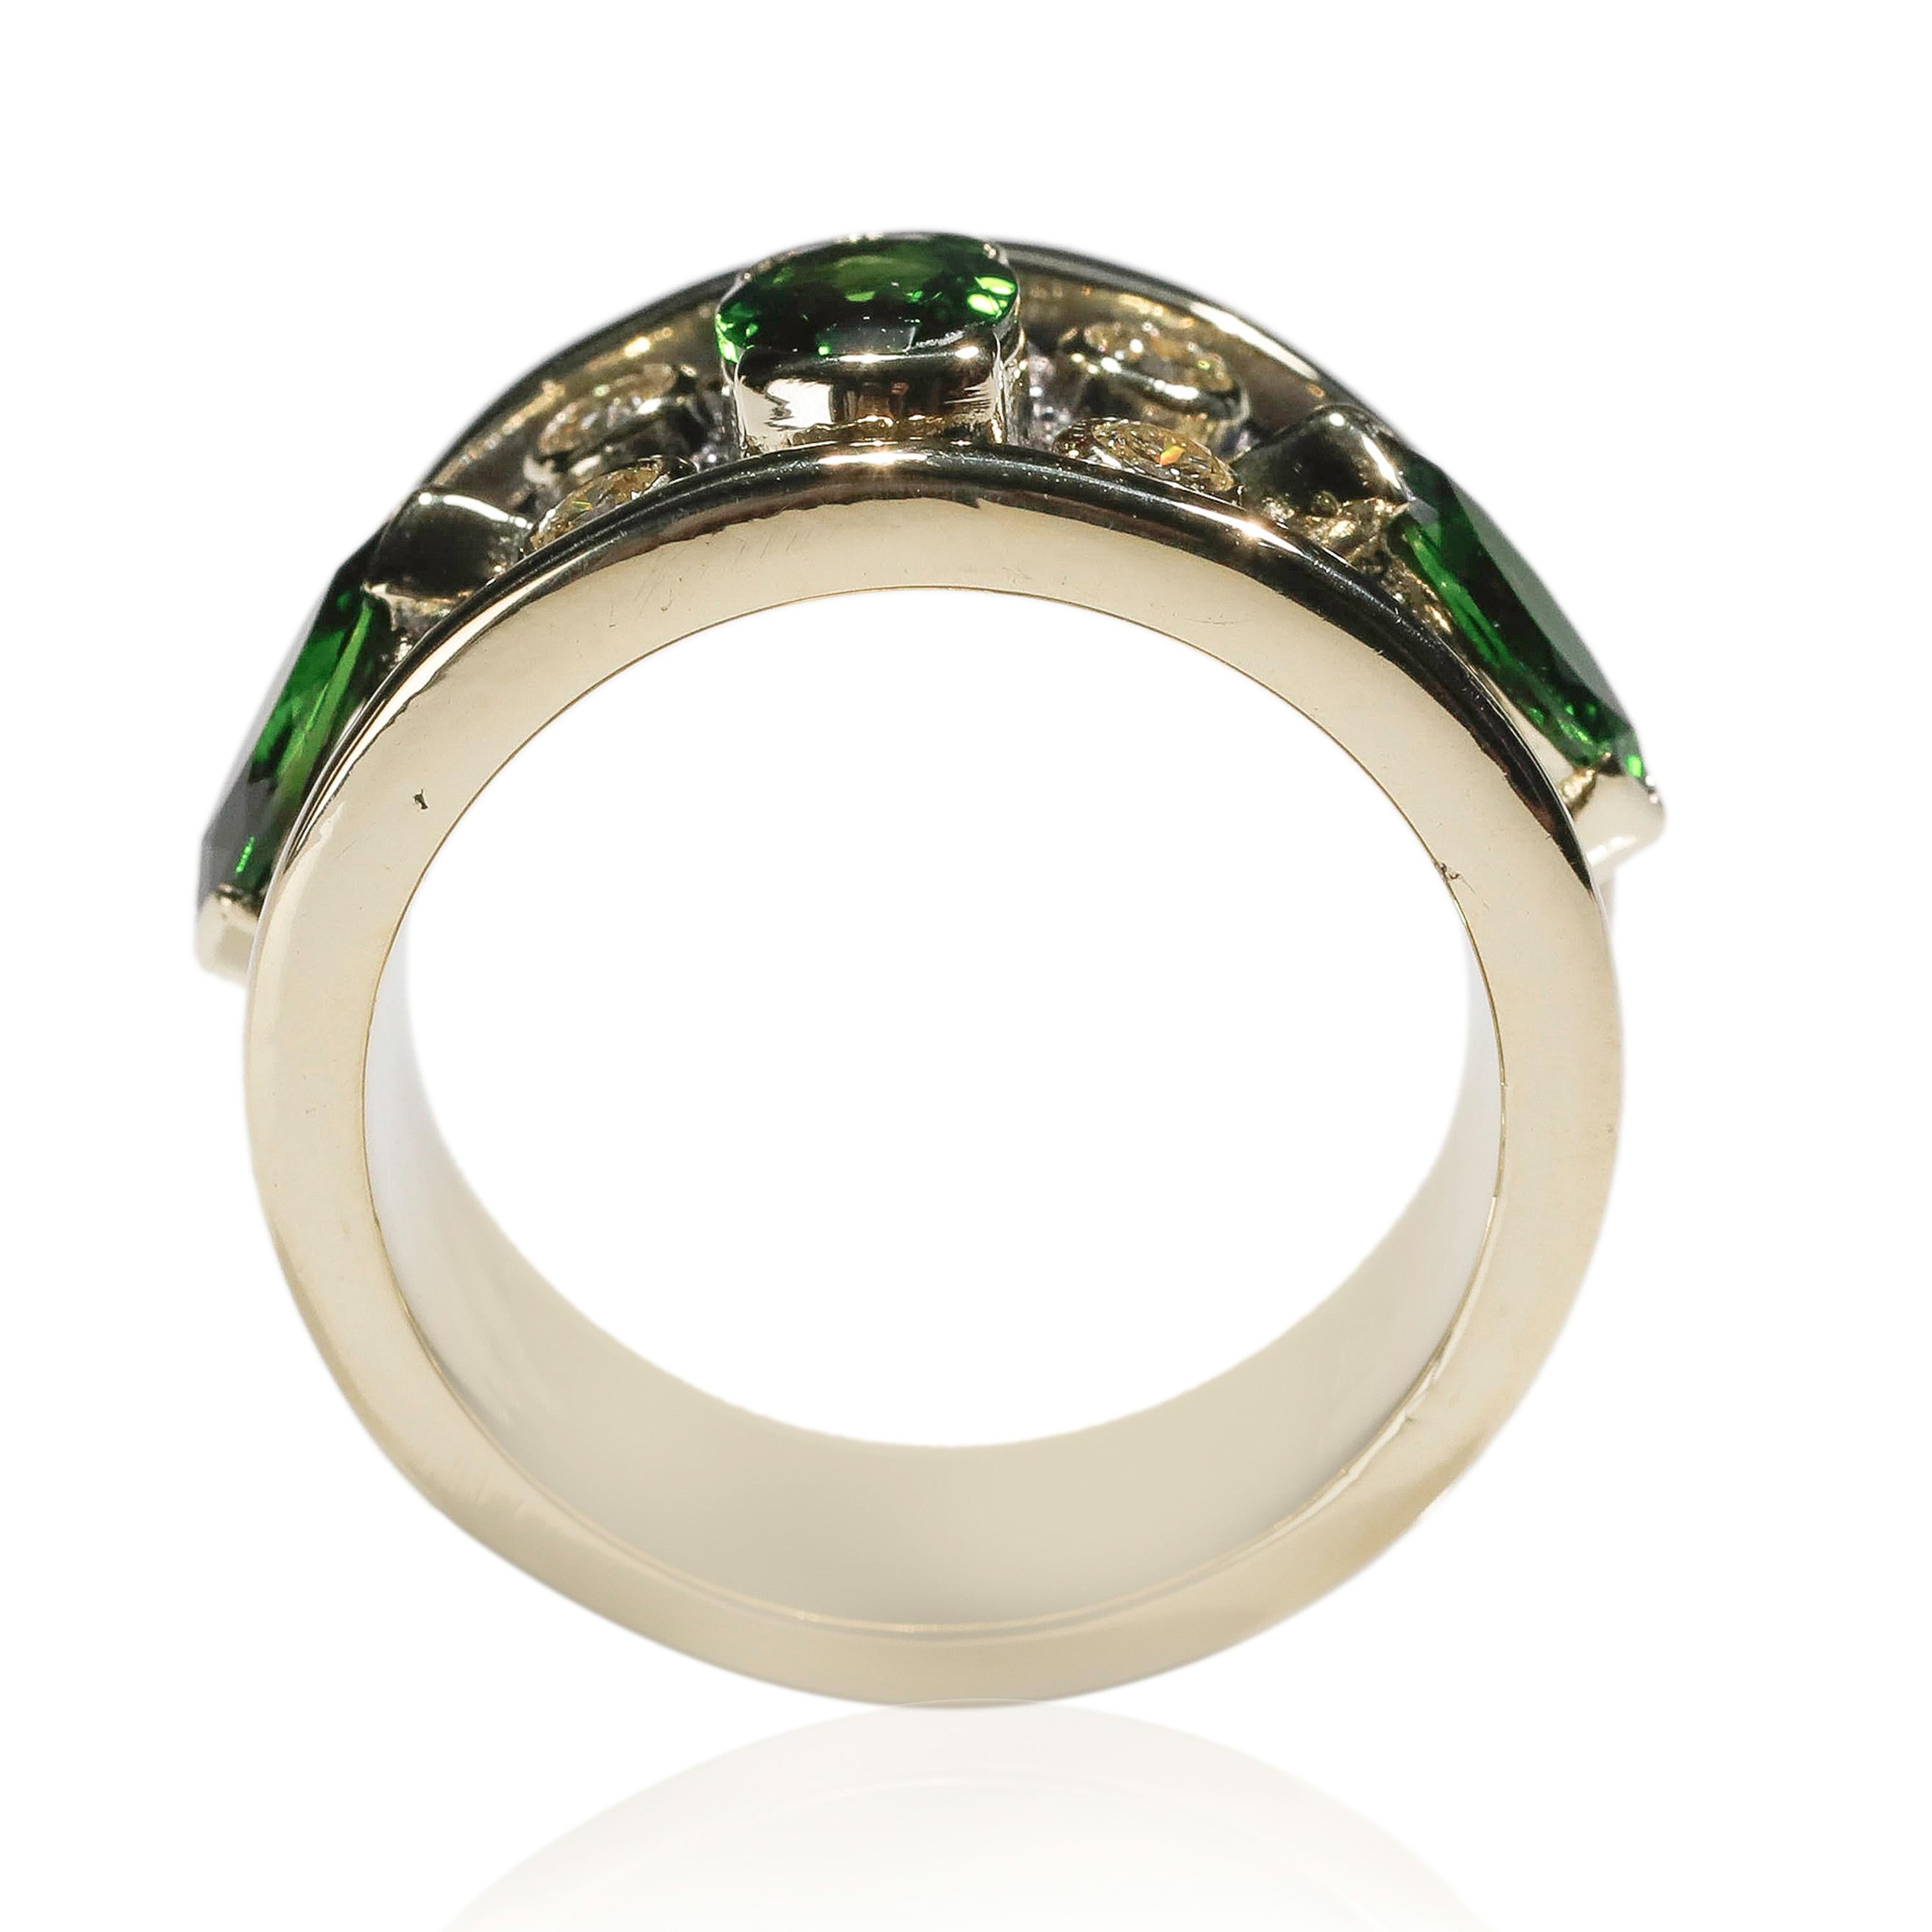 18 kt Yellow Gold 2.5 Ct Chrome Diopside Tourmaline Diamond Band Ring US Size 7

Crafted in 18 kt Yellow Gold, this Unique design showcases a white Diamond 0.35 TCW Round-shaped diamonds, set in yellow gold, fine Oval, and marquise shape mesmerizing